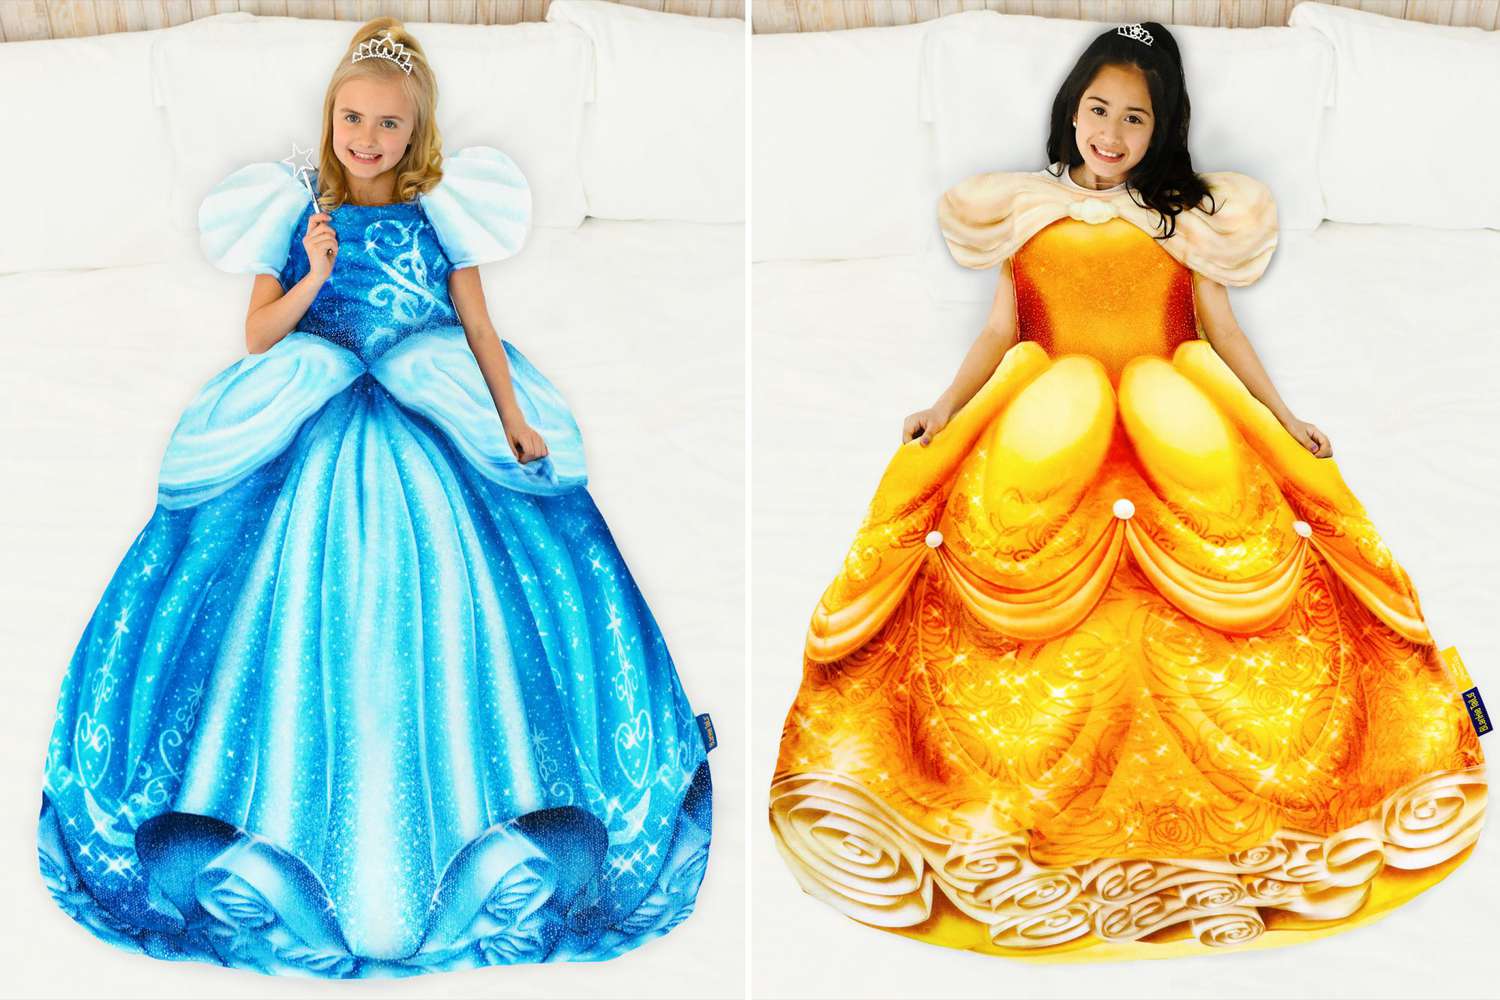 Blankie Tails Just Released A Disney Princess Collection PEOPLEcom